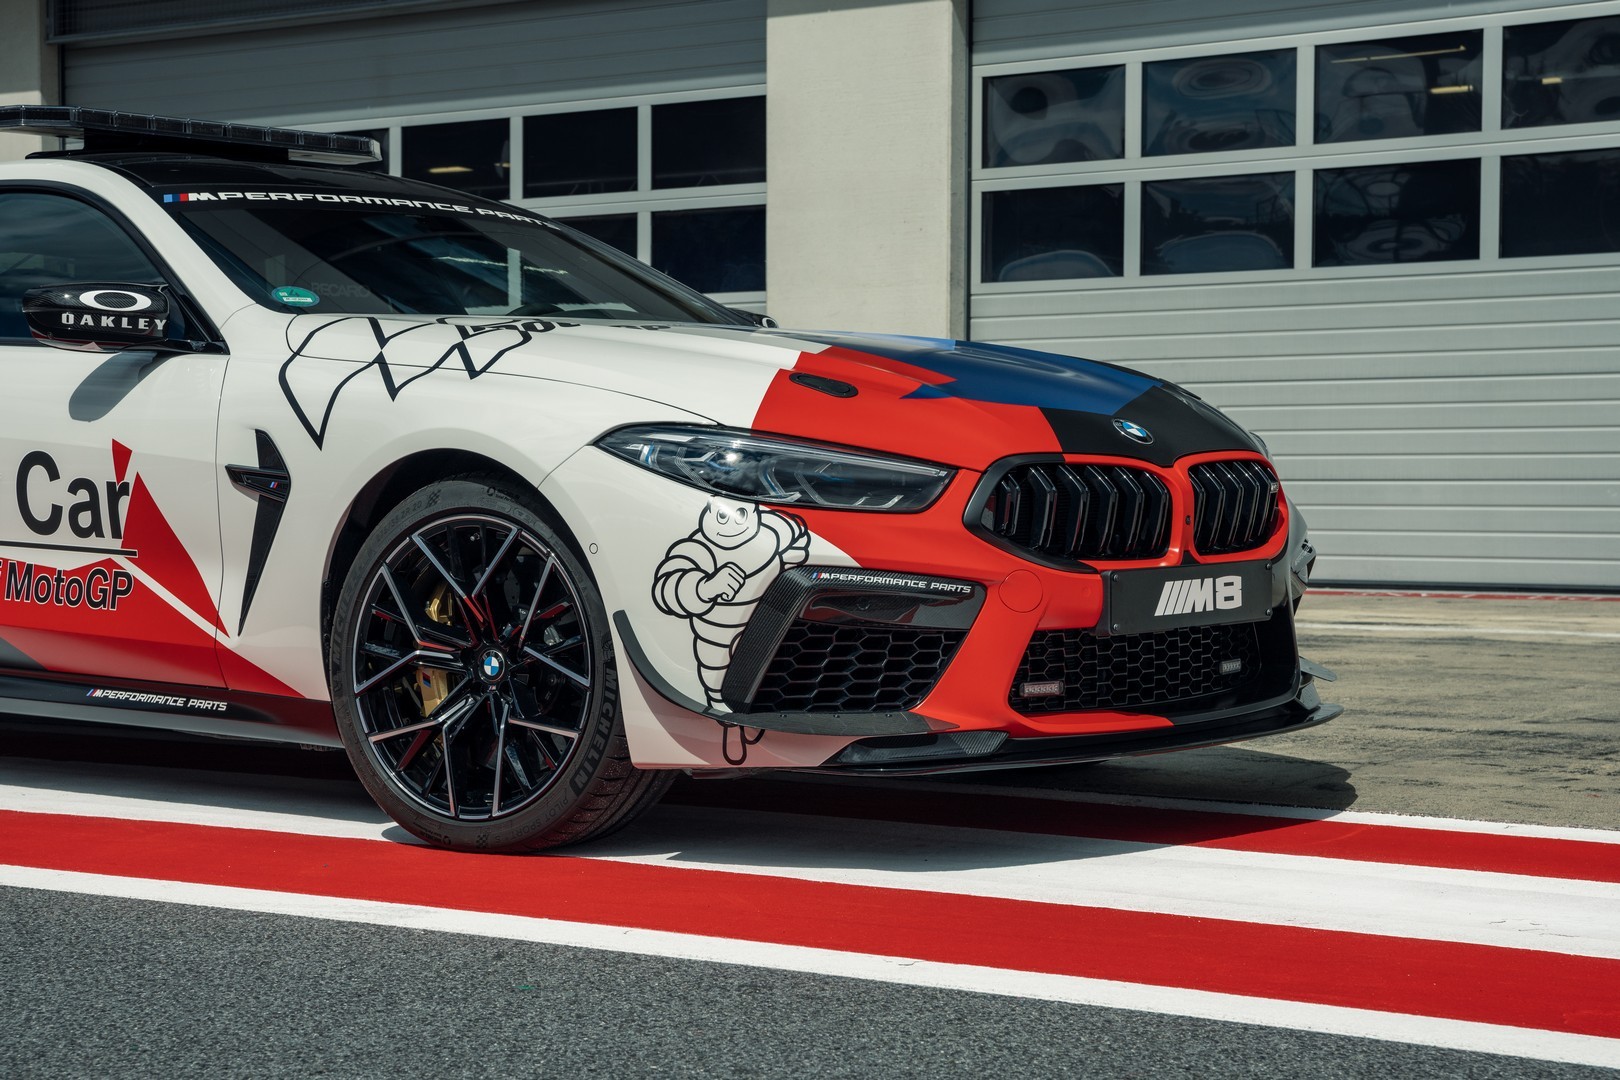 2019 - [BMW] Série 8 Gran Coupé [G16] - Page 7 Bmw-surprisingly-turned-the-new-m8-gran-coupe-into-a-safety-car-for-motogp_10